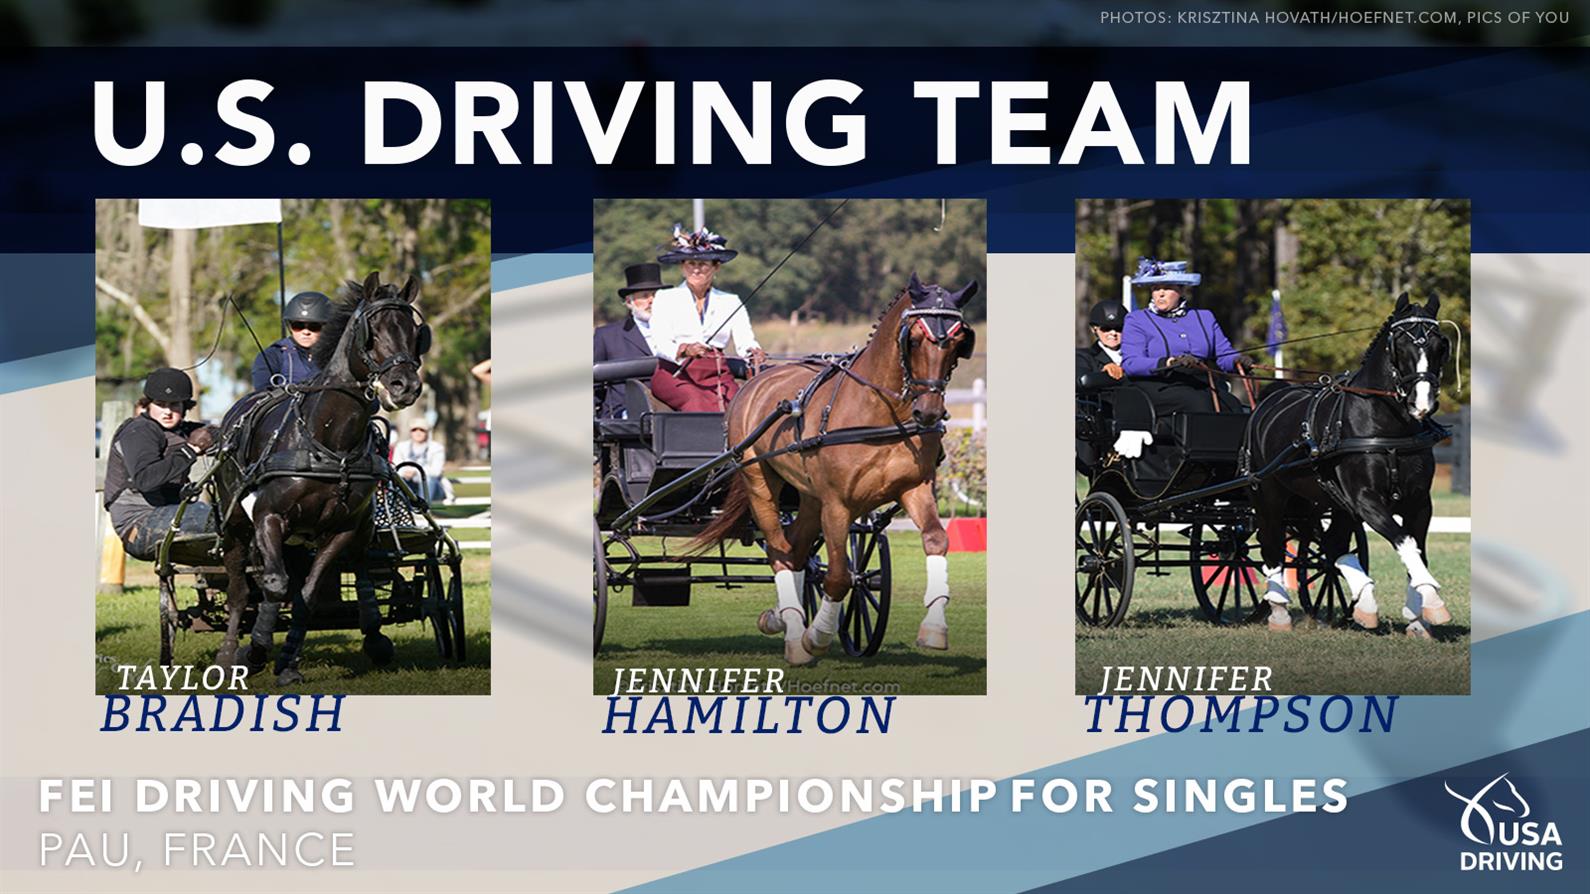 Team members for the 2020 FEI Driving World Championships for Singles